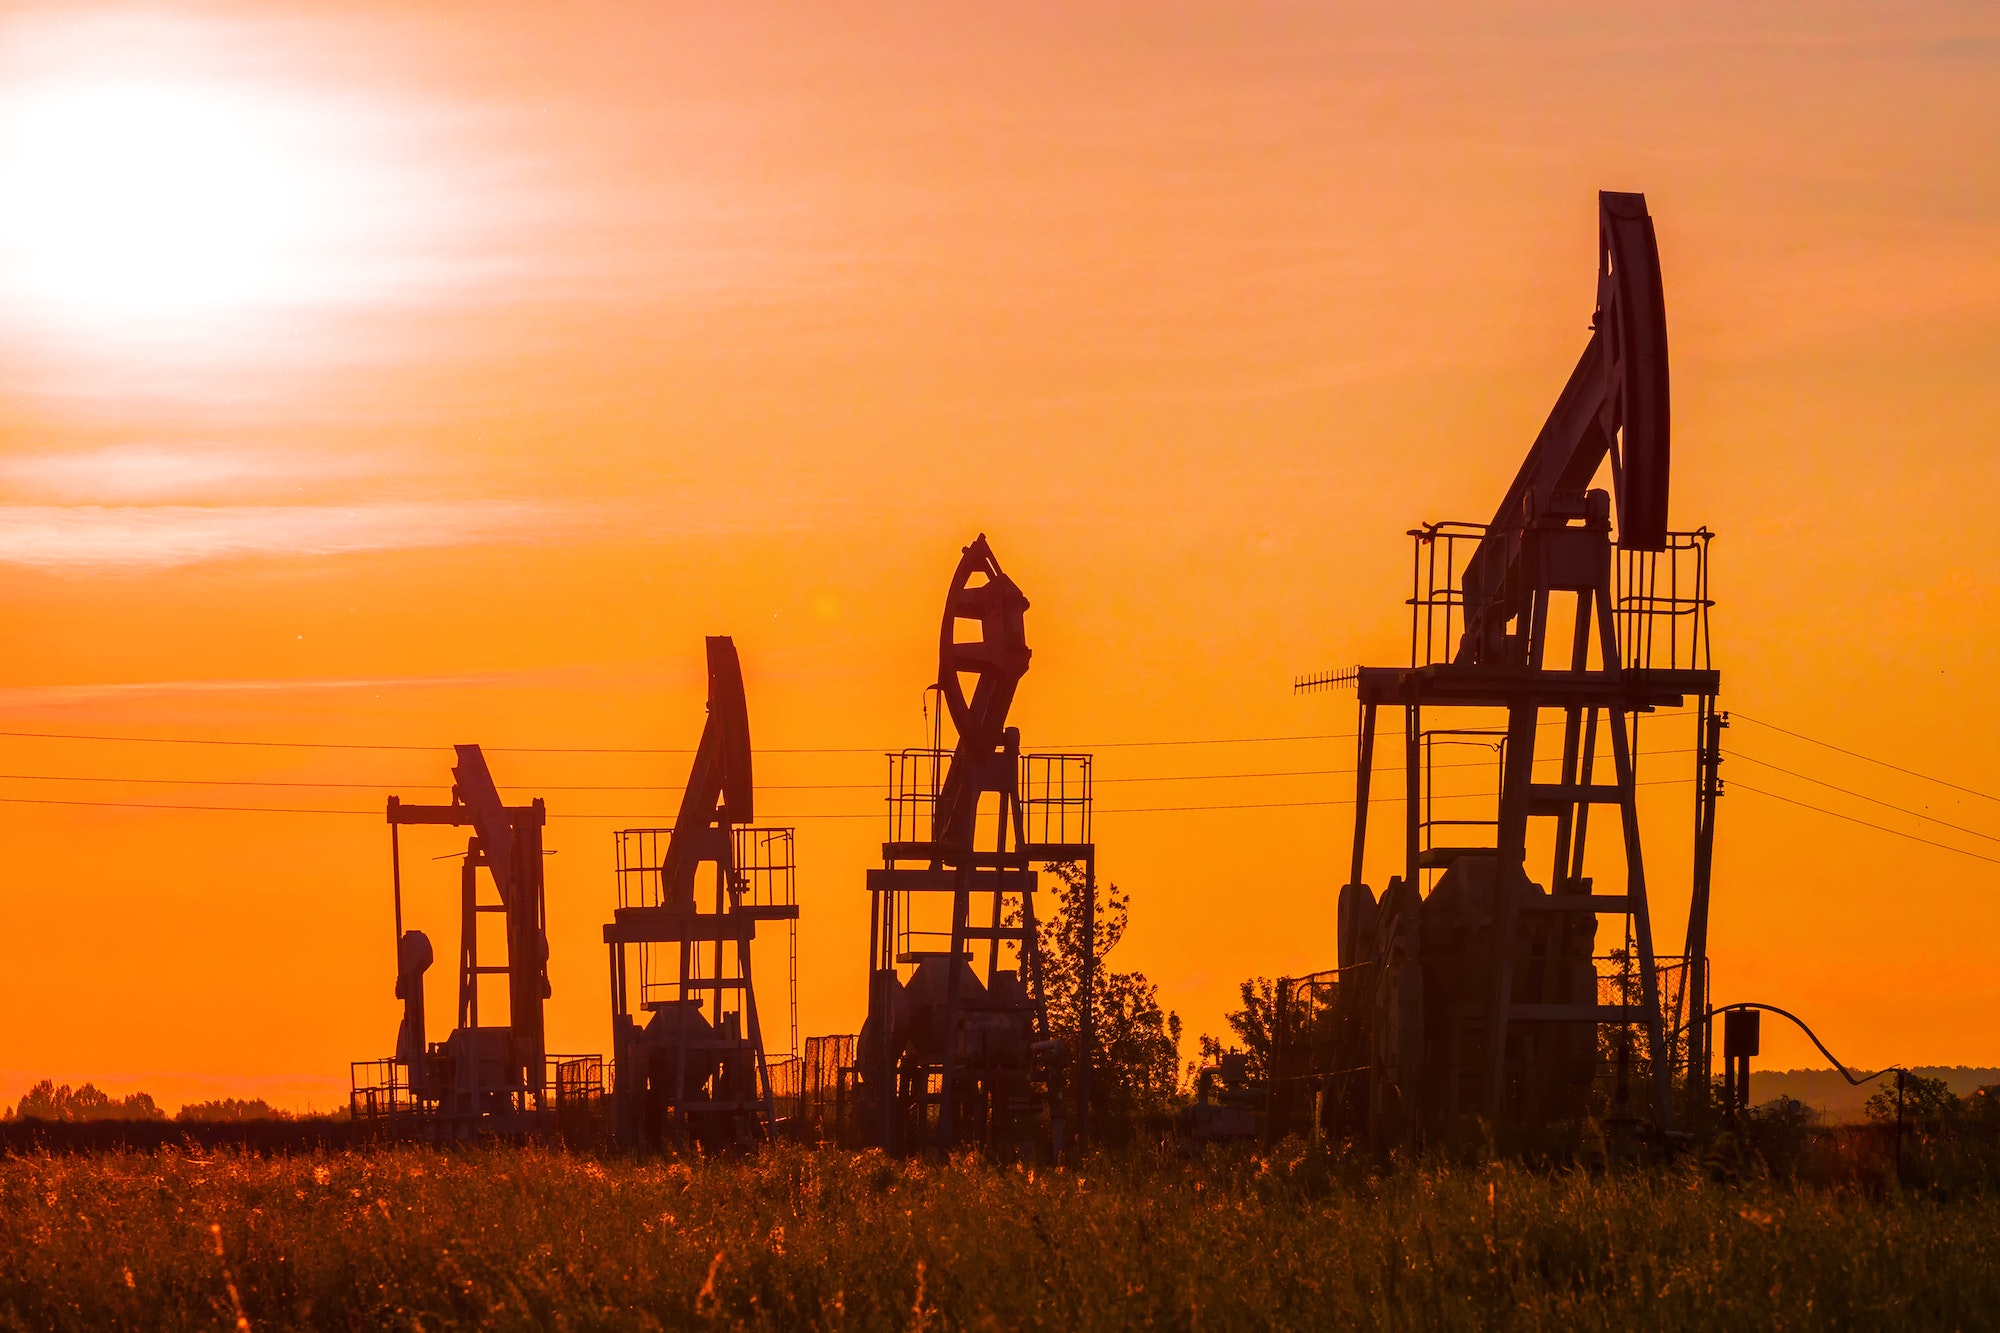 The silhouette of oil pumps in a large oil field at sunrise.